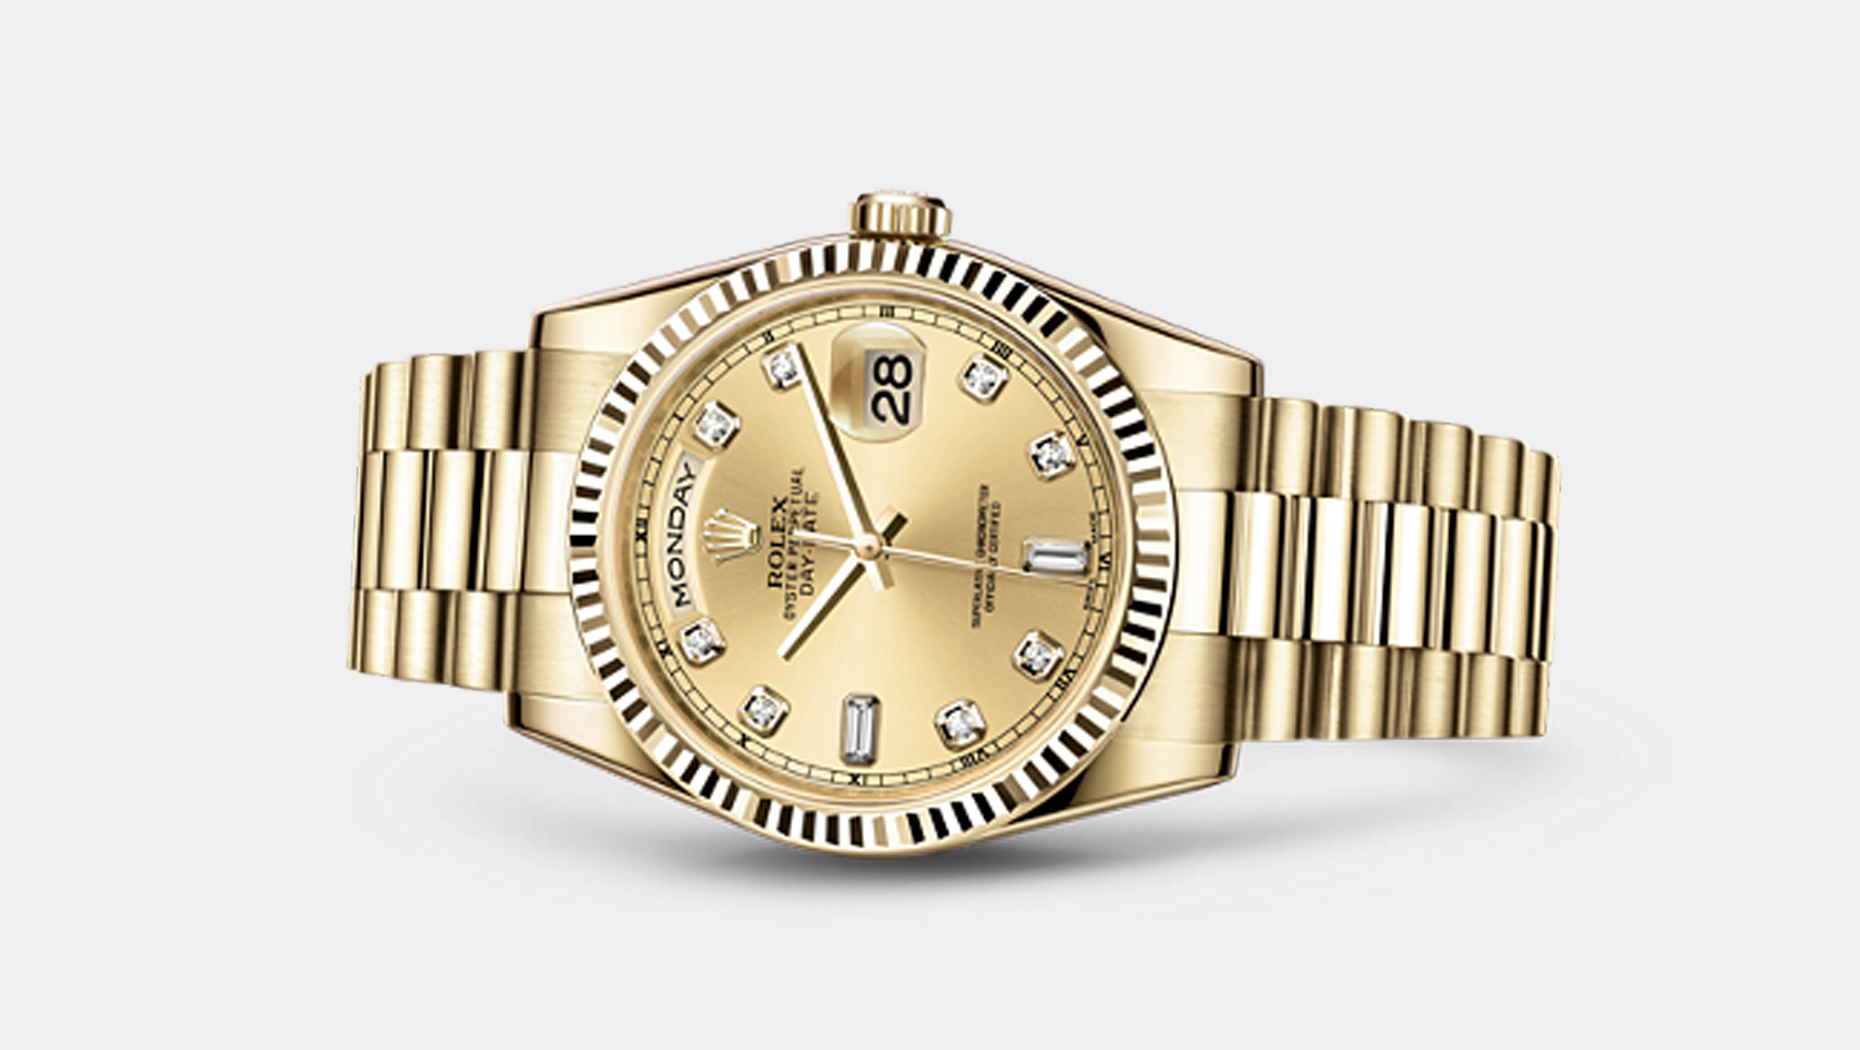 WHERE CAN I SELL MY ROLEX WATCH IN MIAMI FL